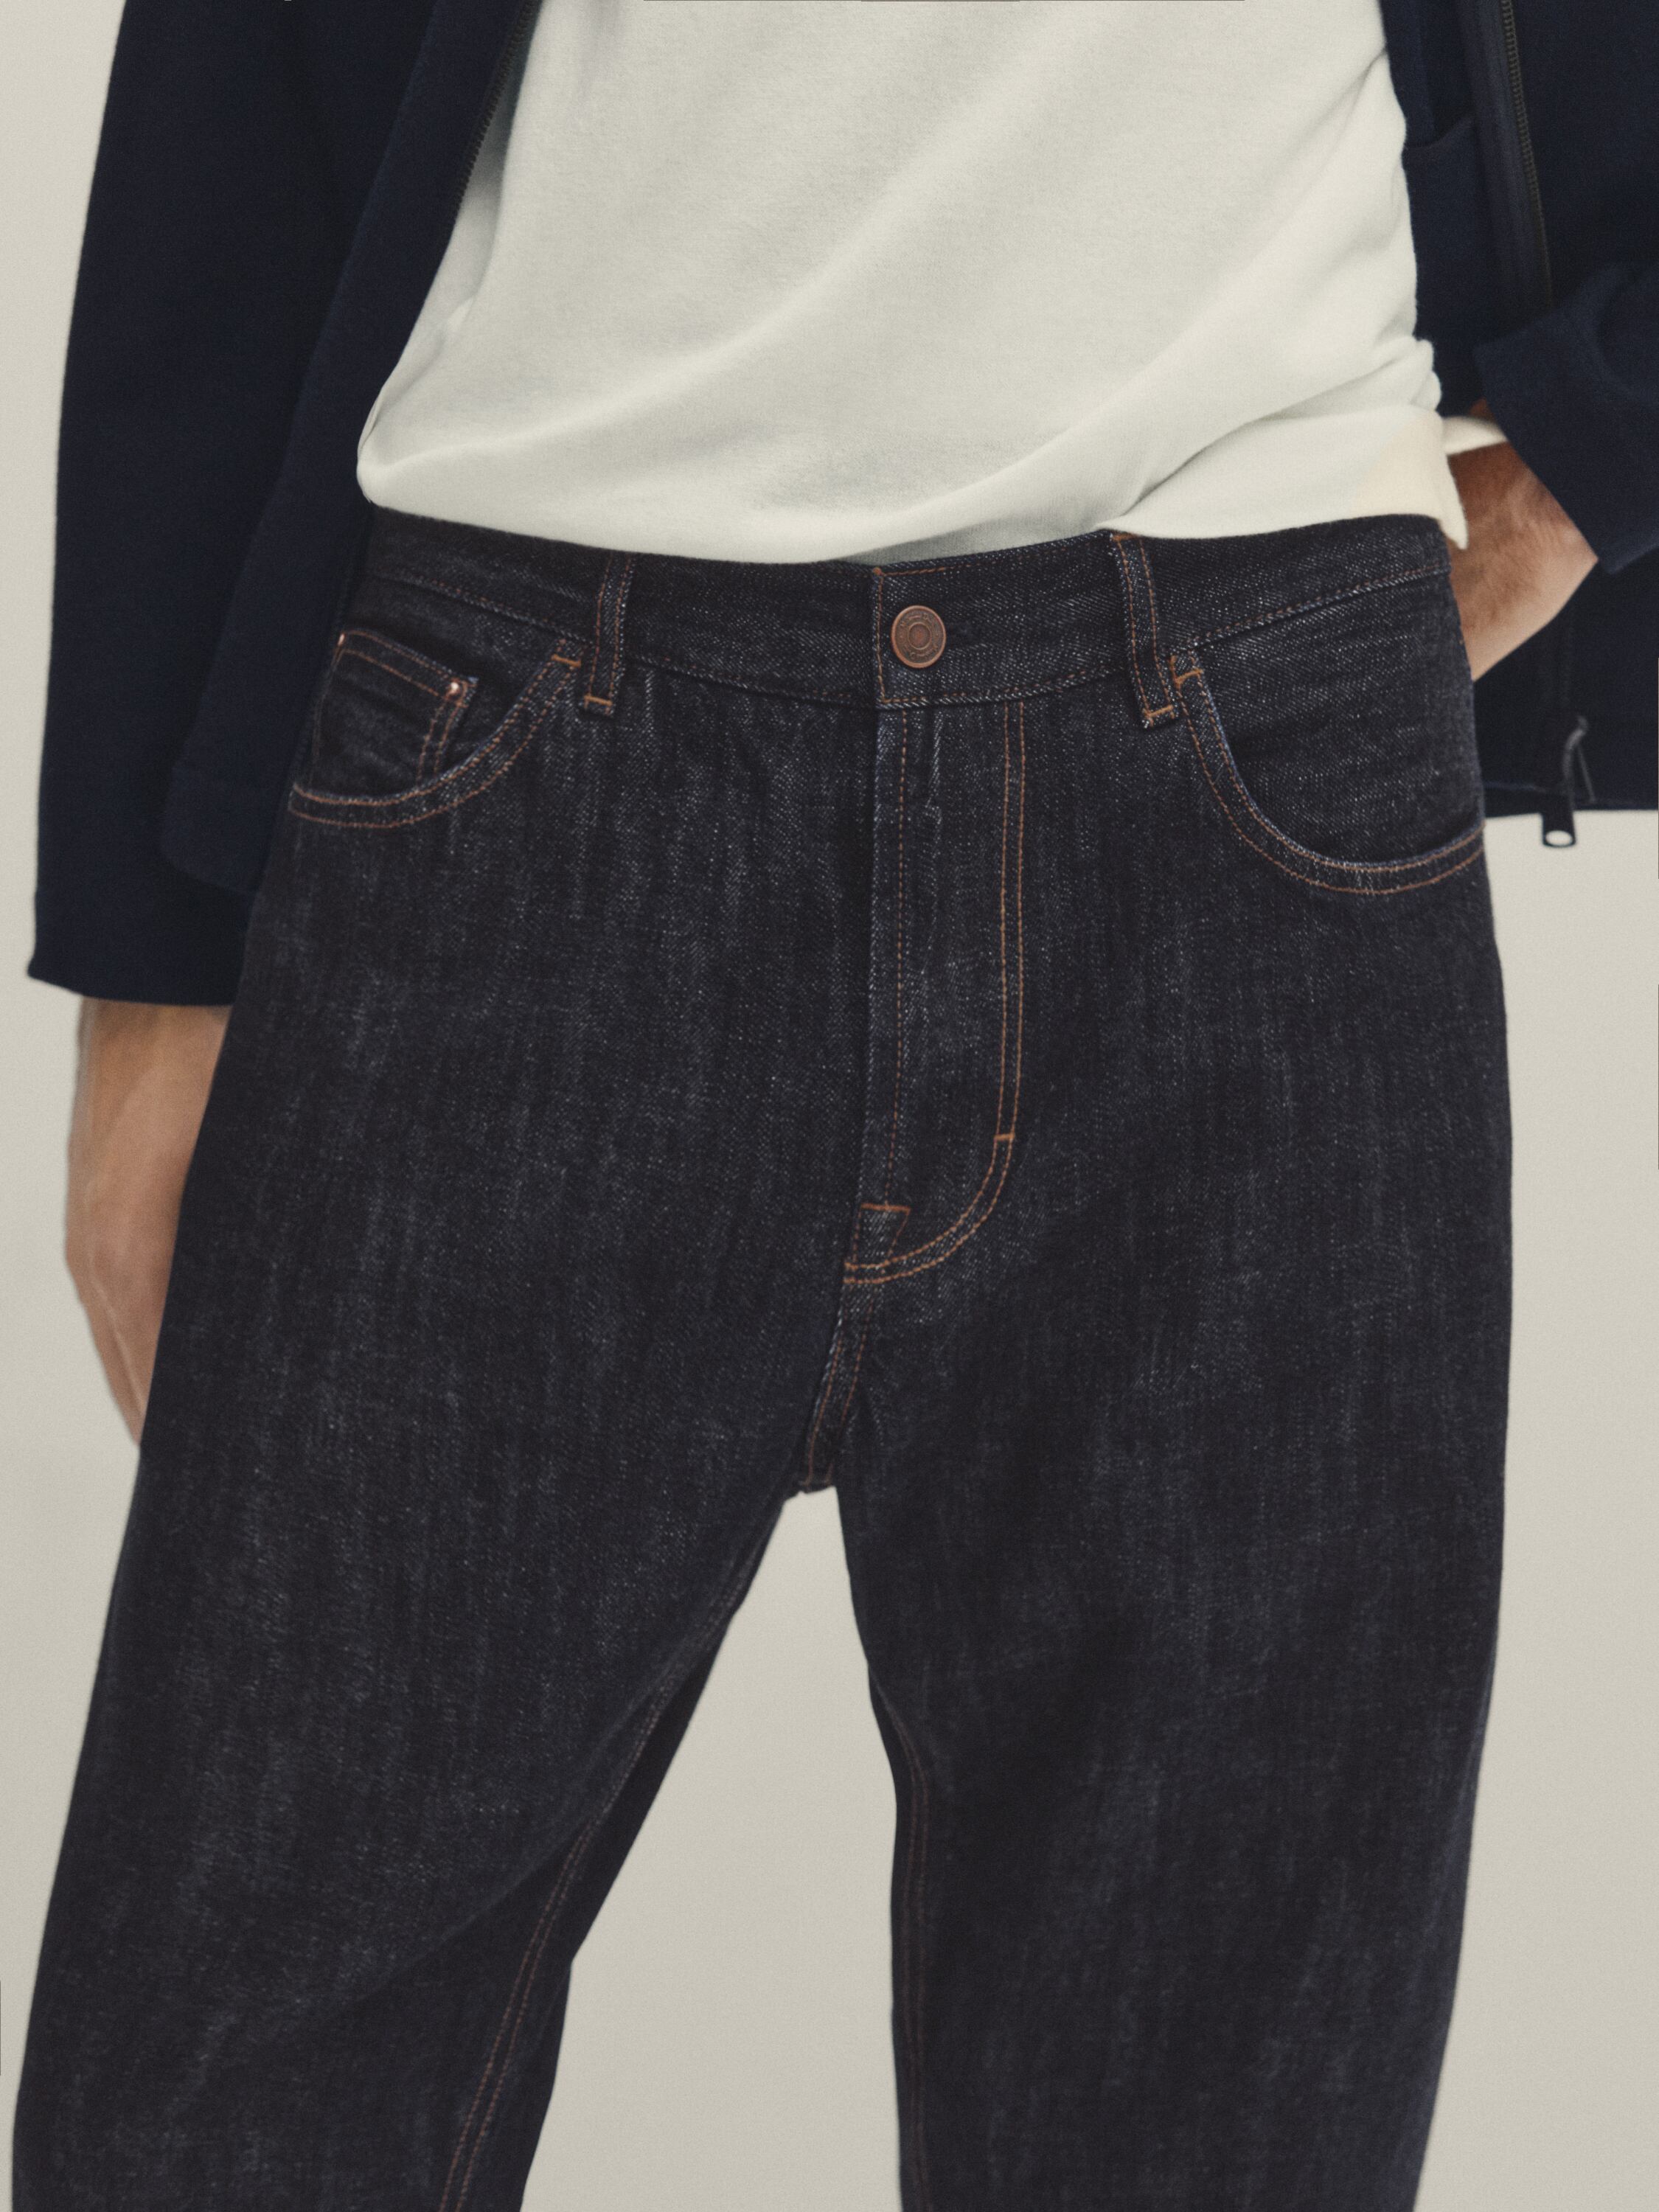 Relaxed fit selvedge jeans